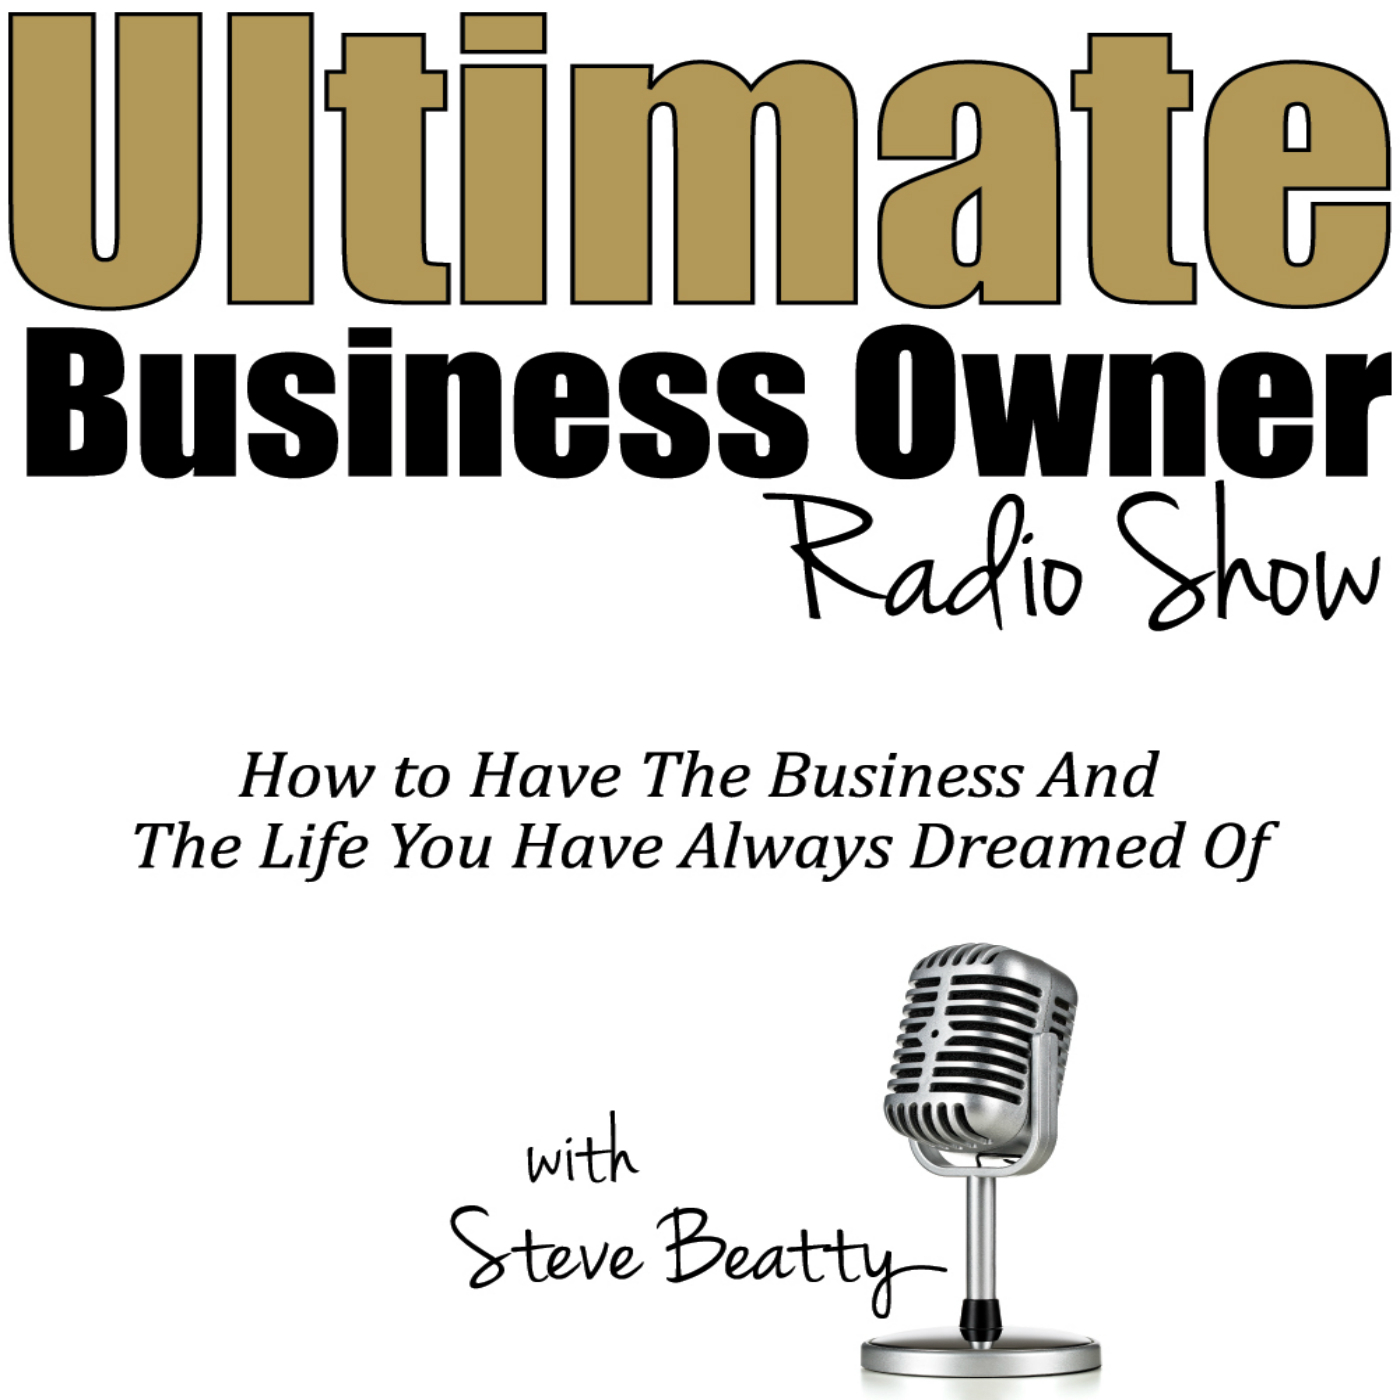 Ultimate Business Owner 20M Interview: Owners & Business Management - Dan Yount